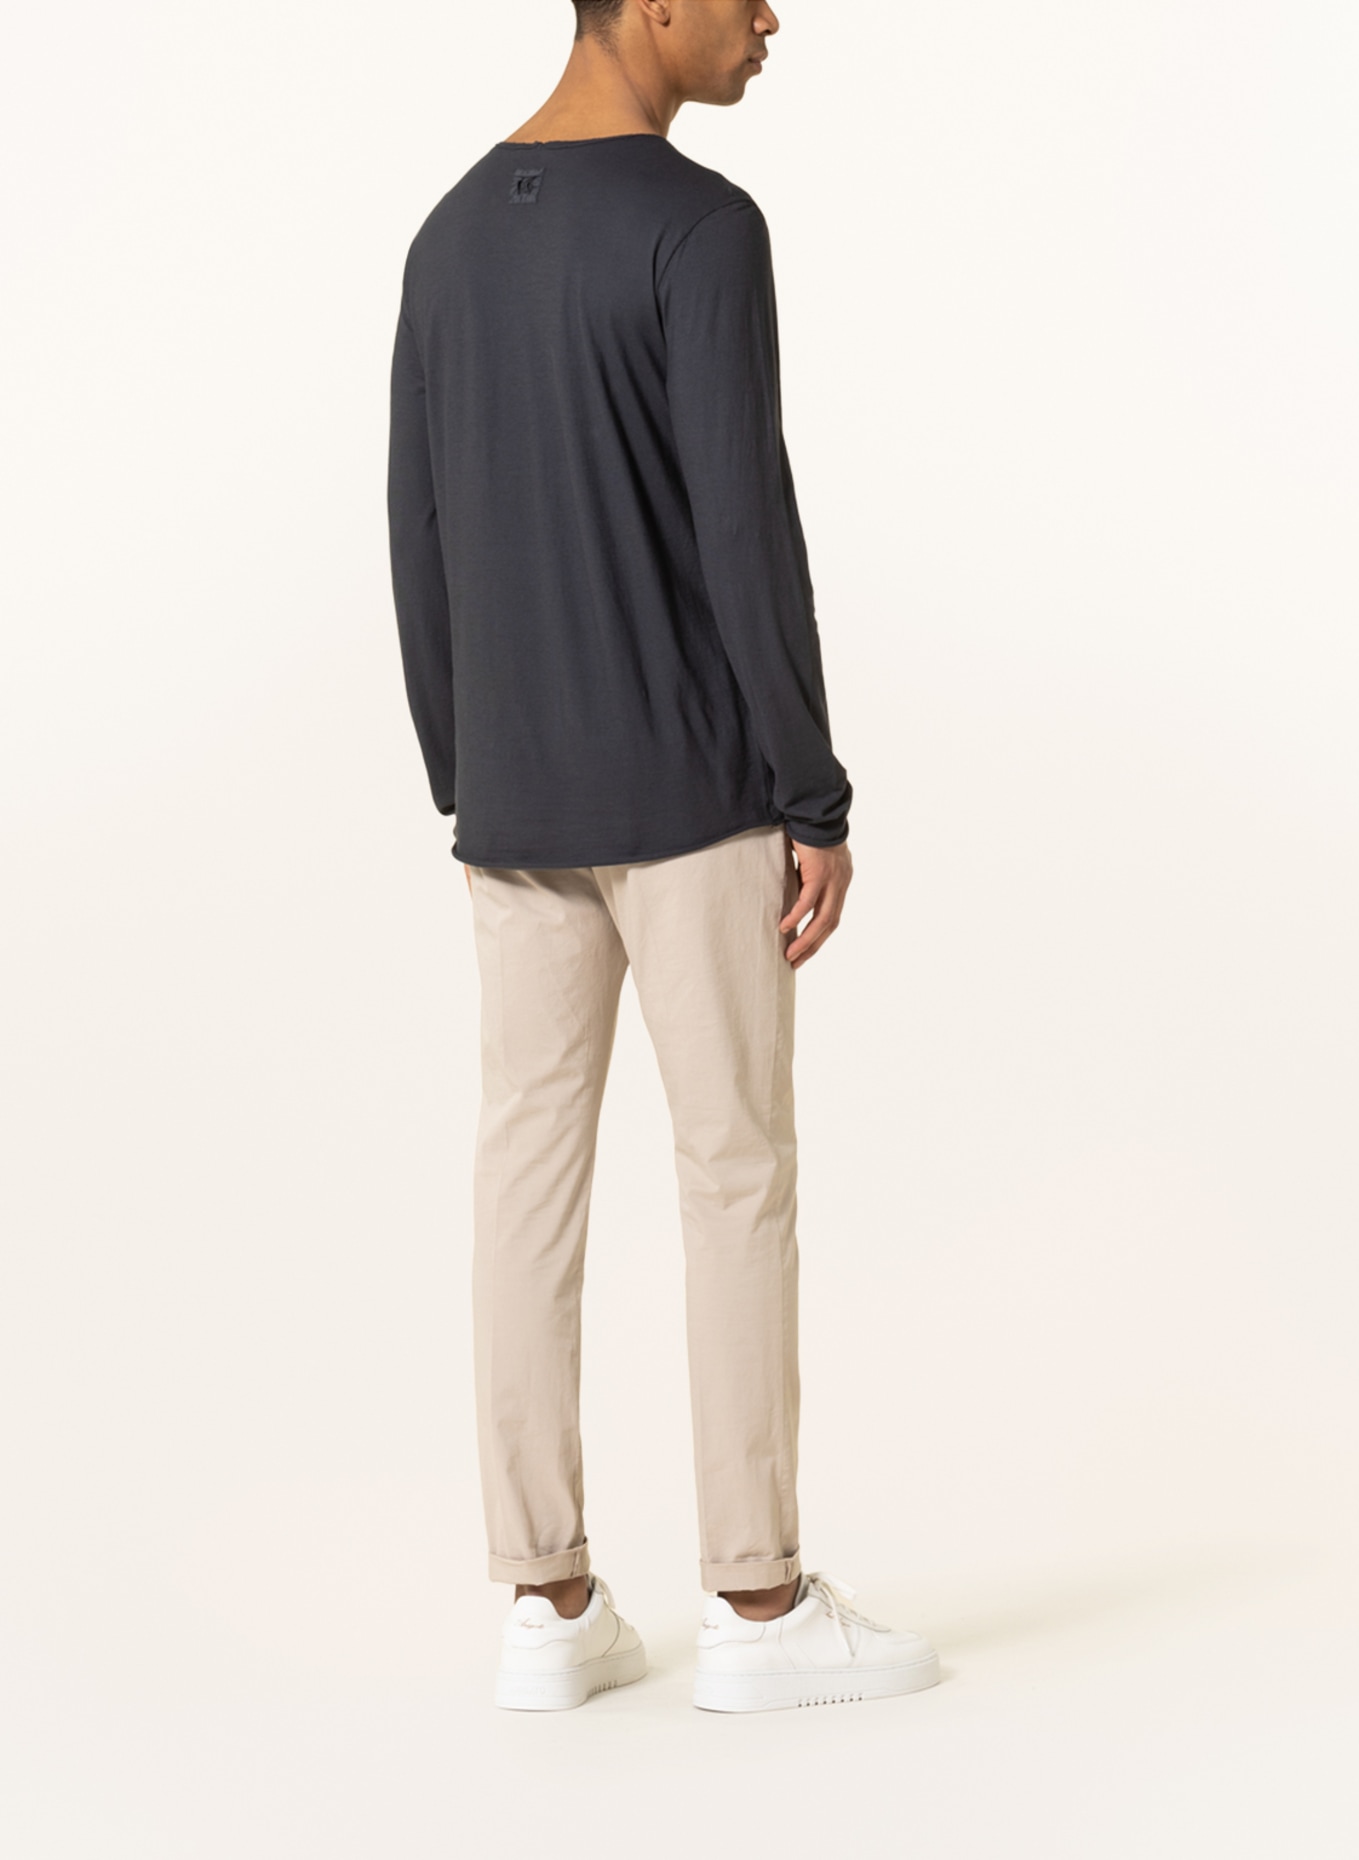 hannes roether Long sleeve shirt, Color: DARK GRAY (Image 3)